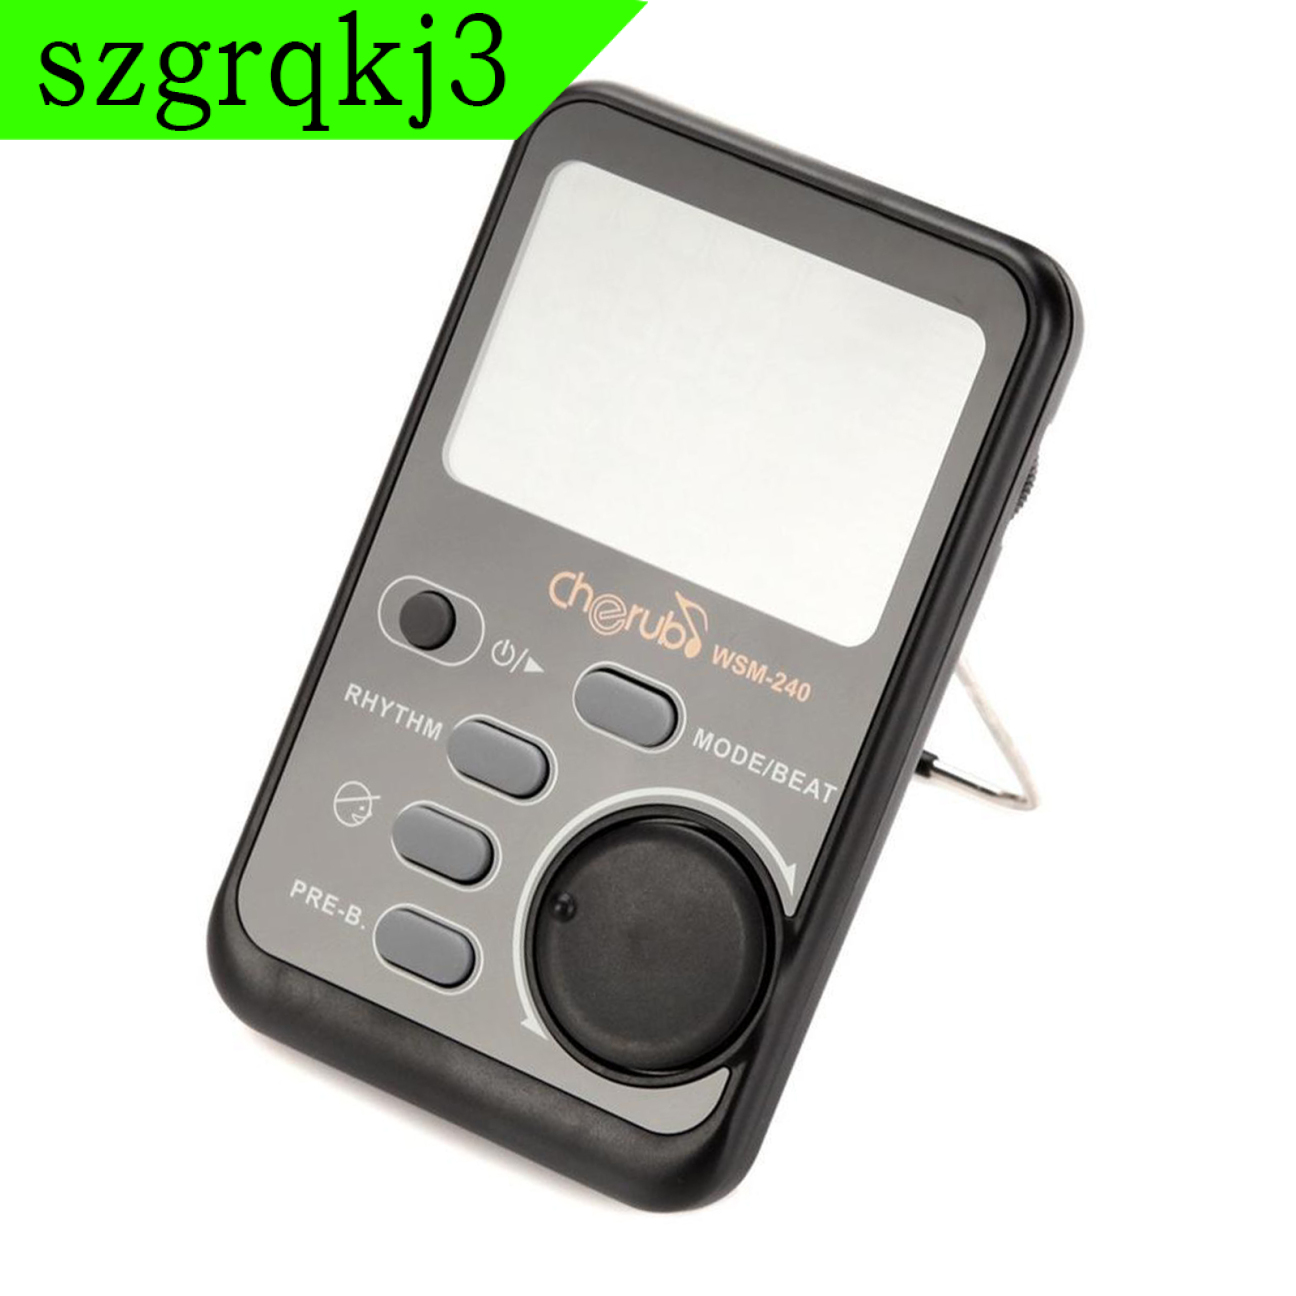 WenZhen Music Portable LCD Metronome Tuner Beat Tempo for Piano Violin Guitar Drum Bass